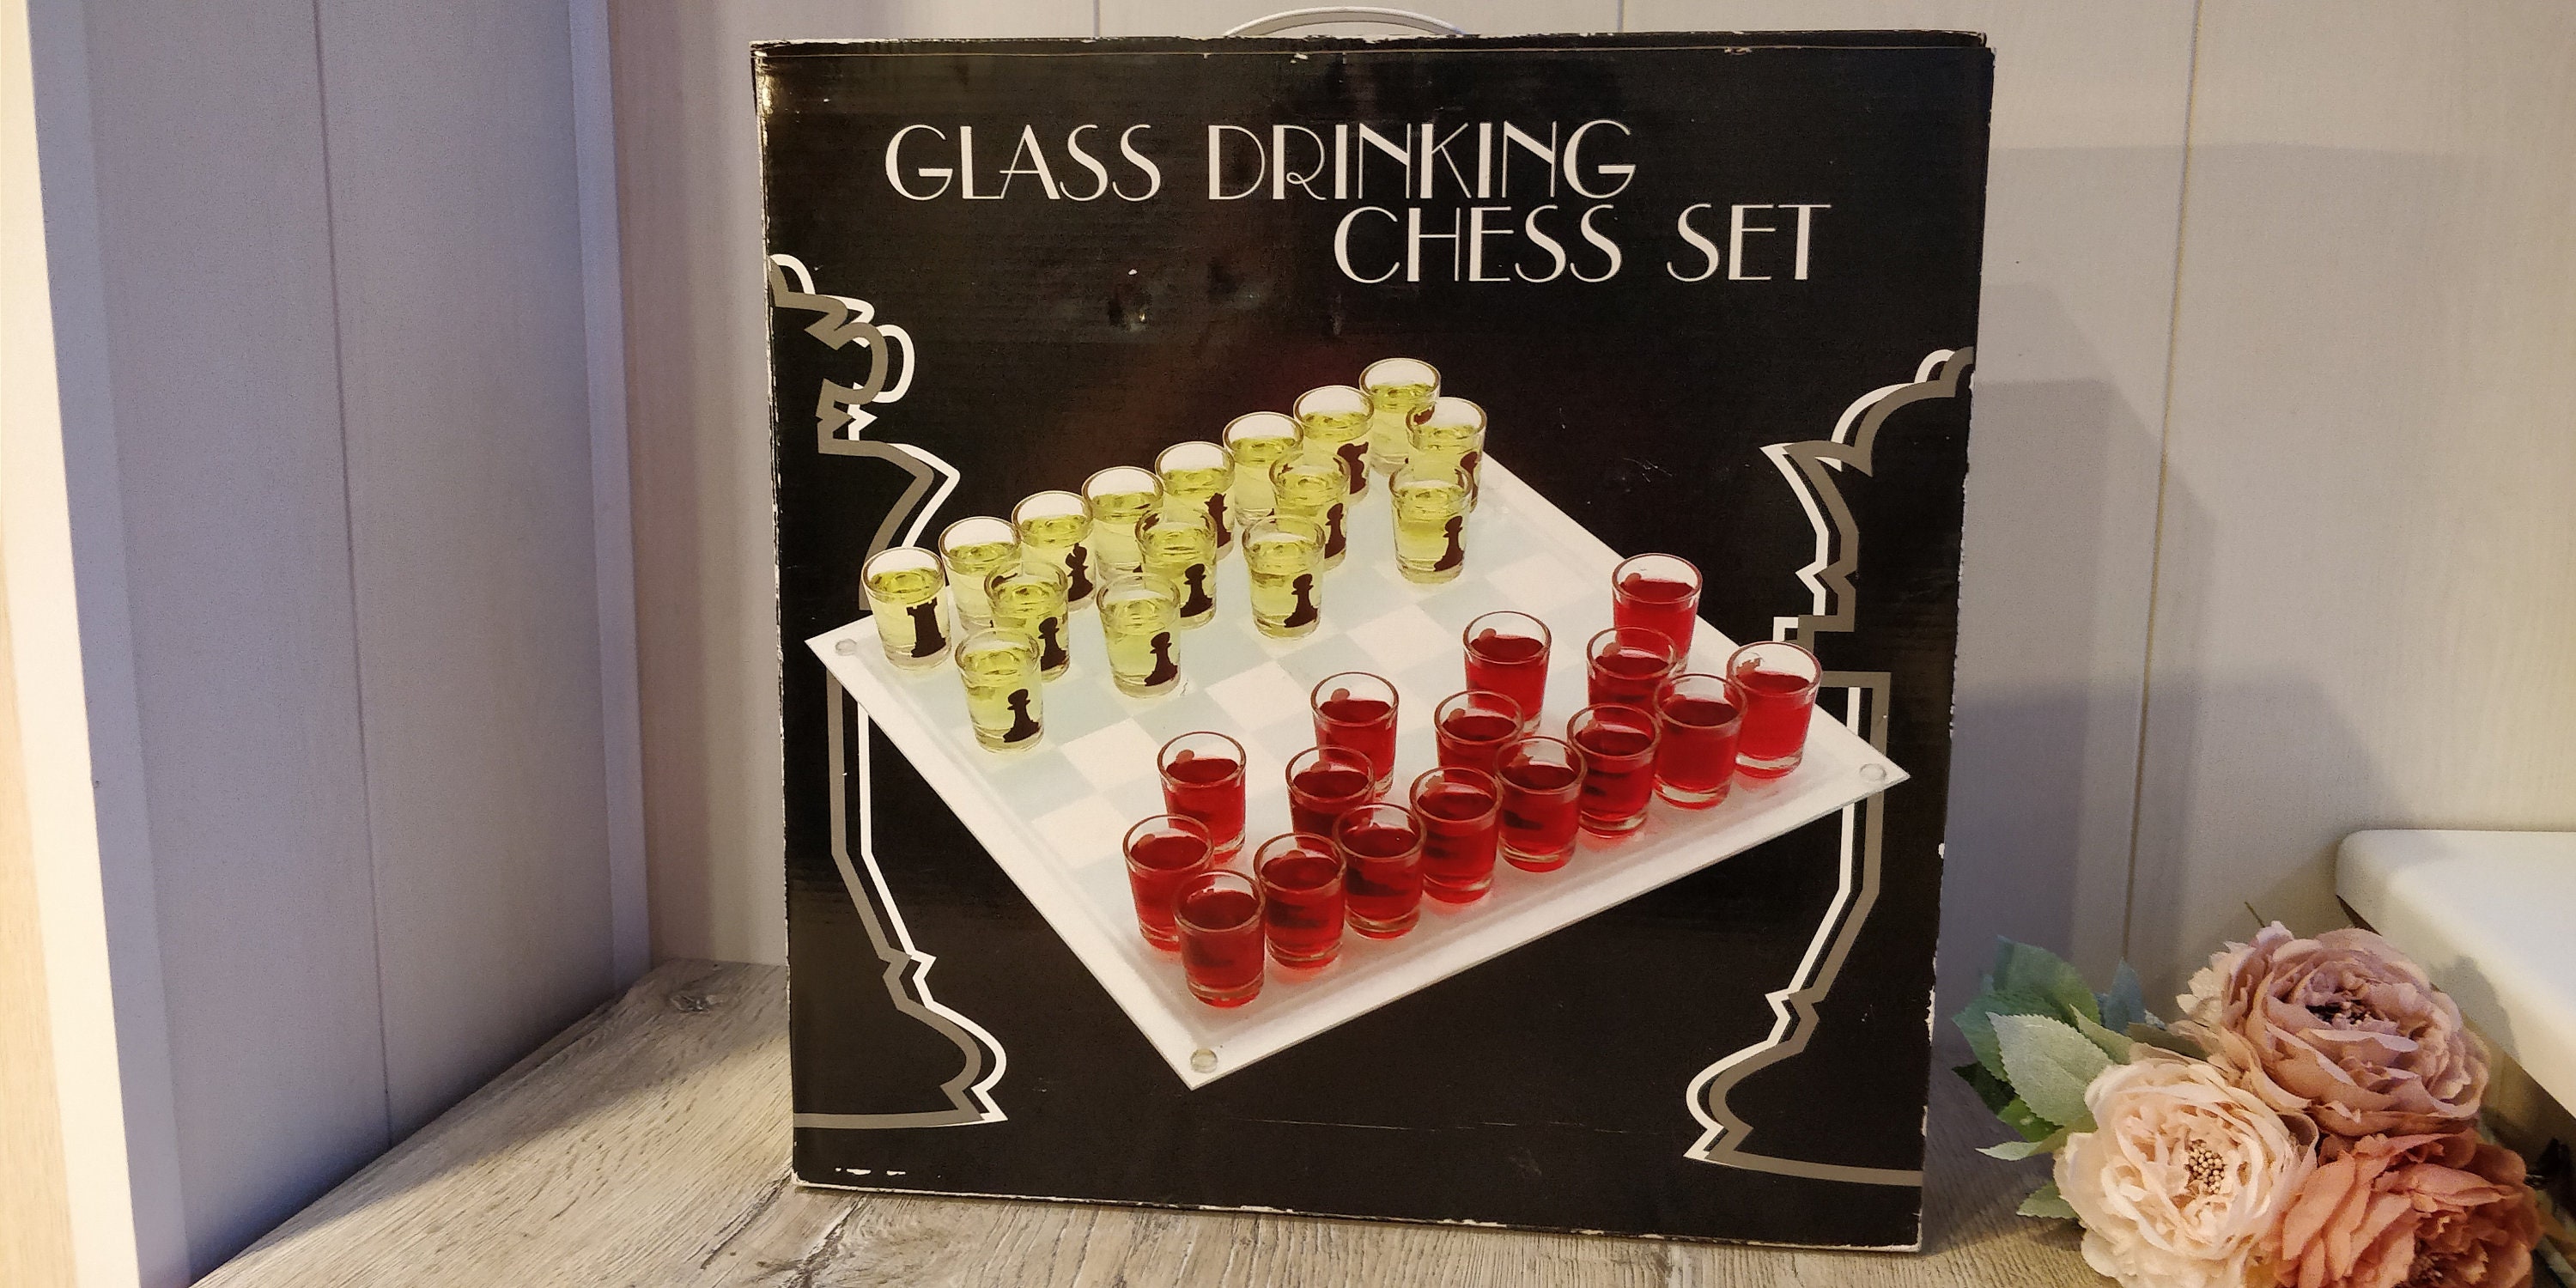 Glass Chess Drinking Game